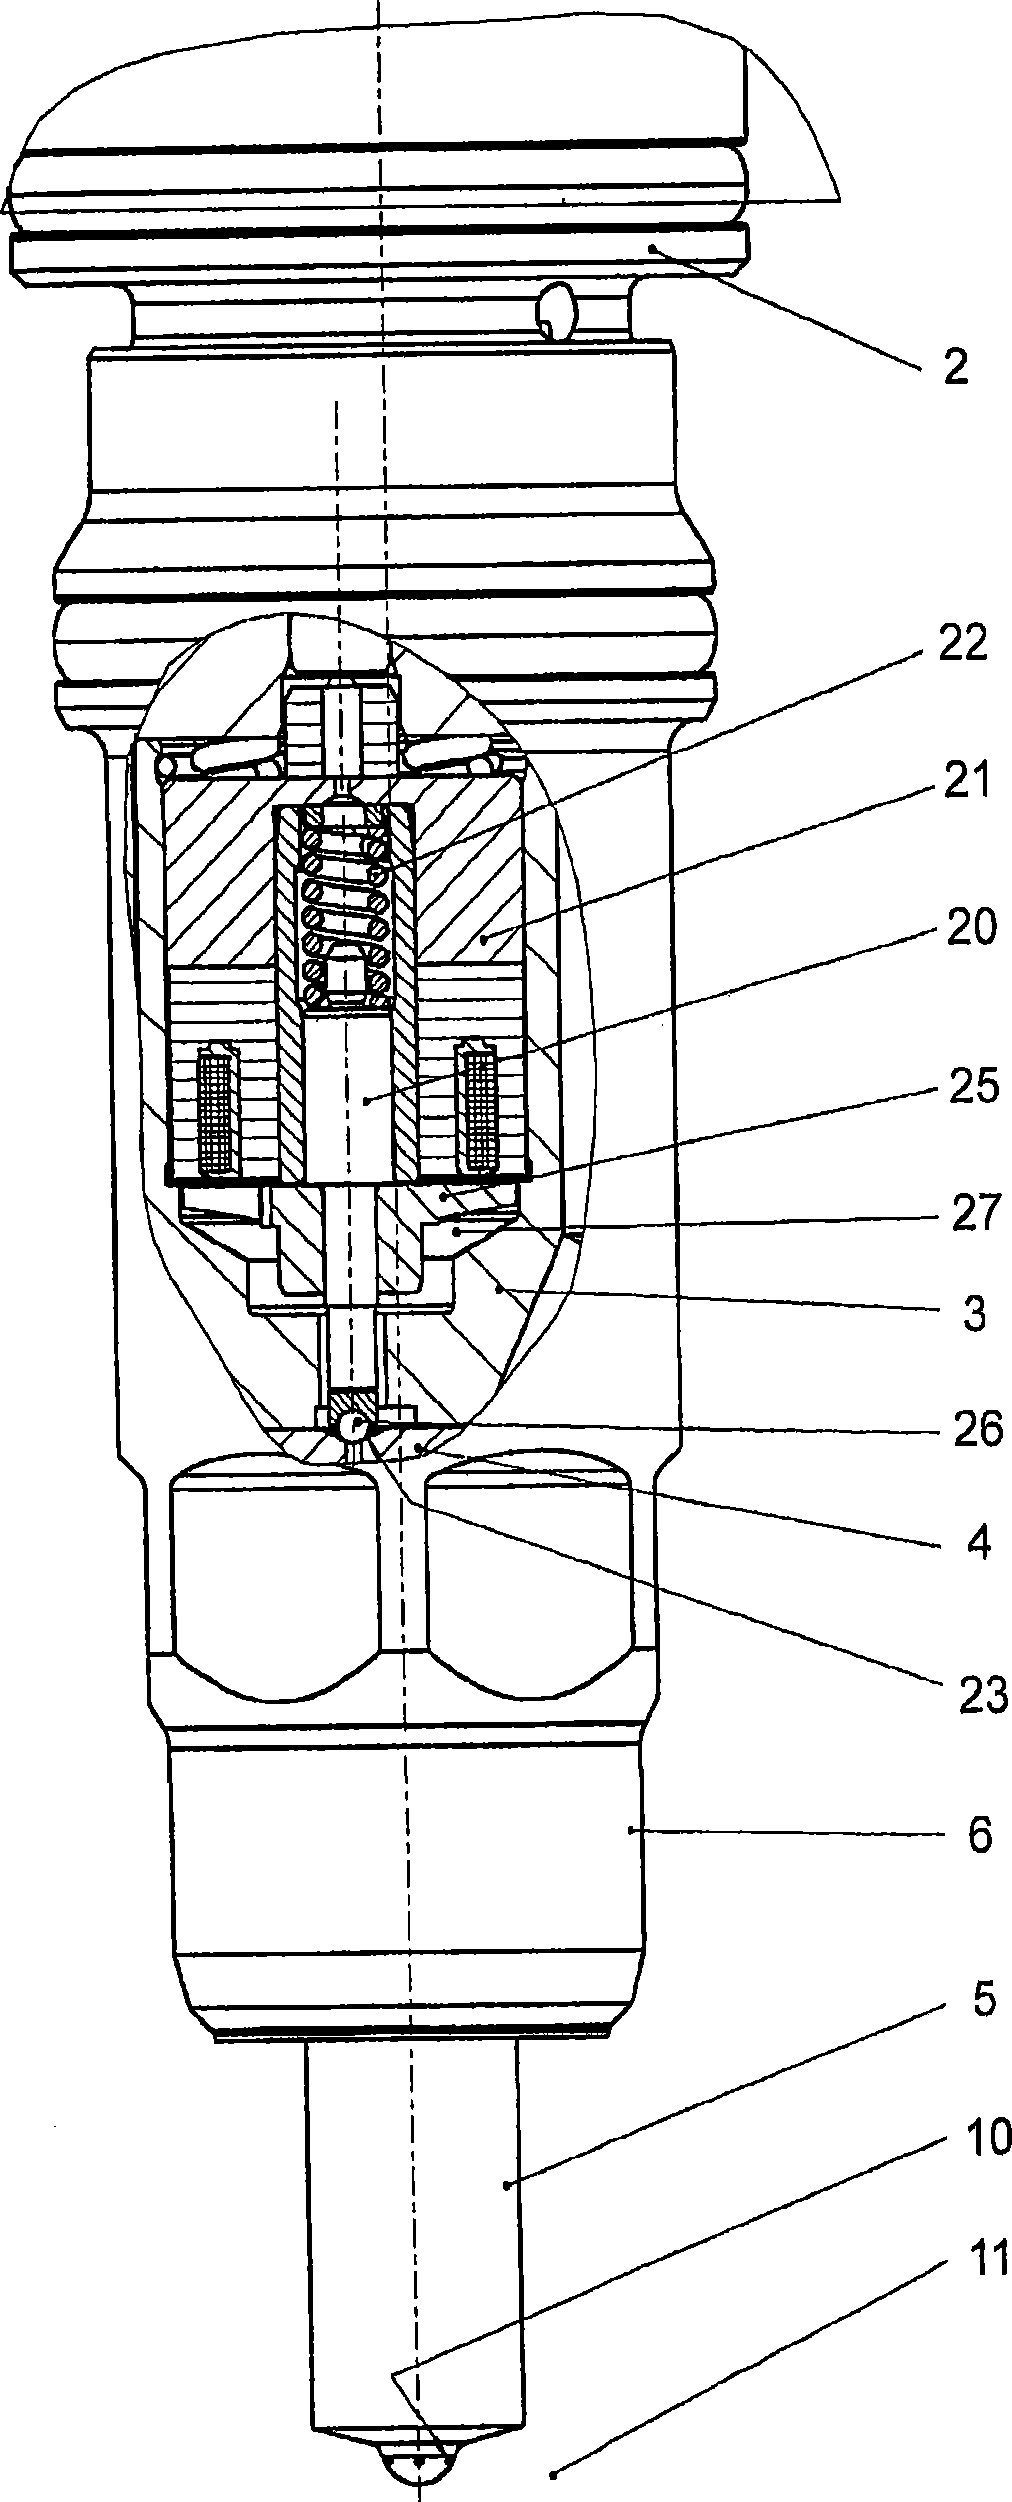 Method of preheating injectors of internal combustion engines